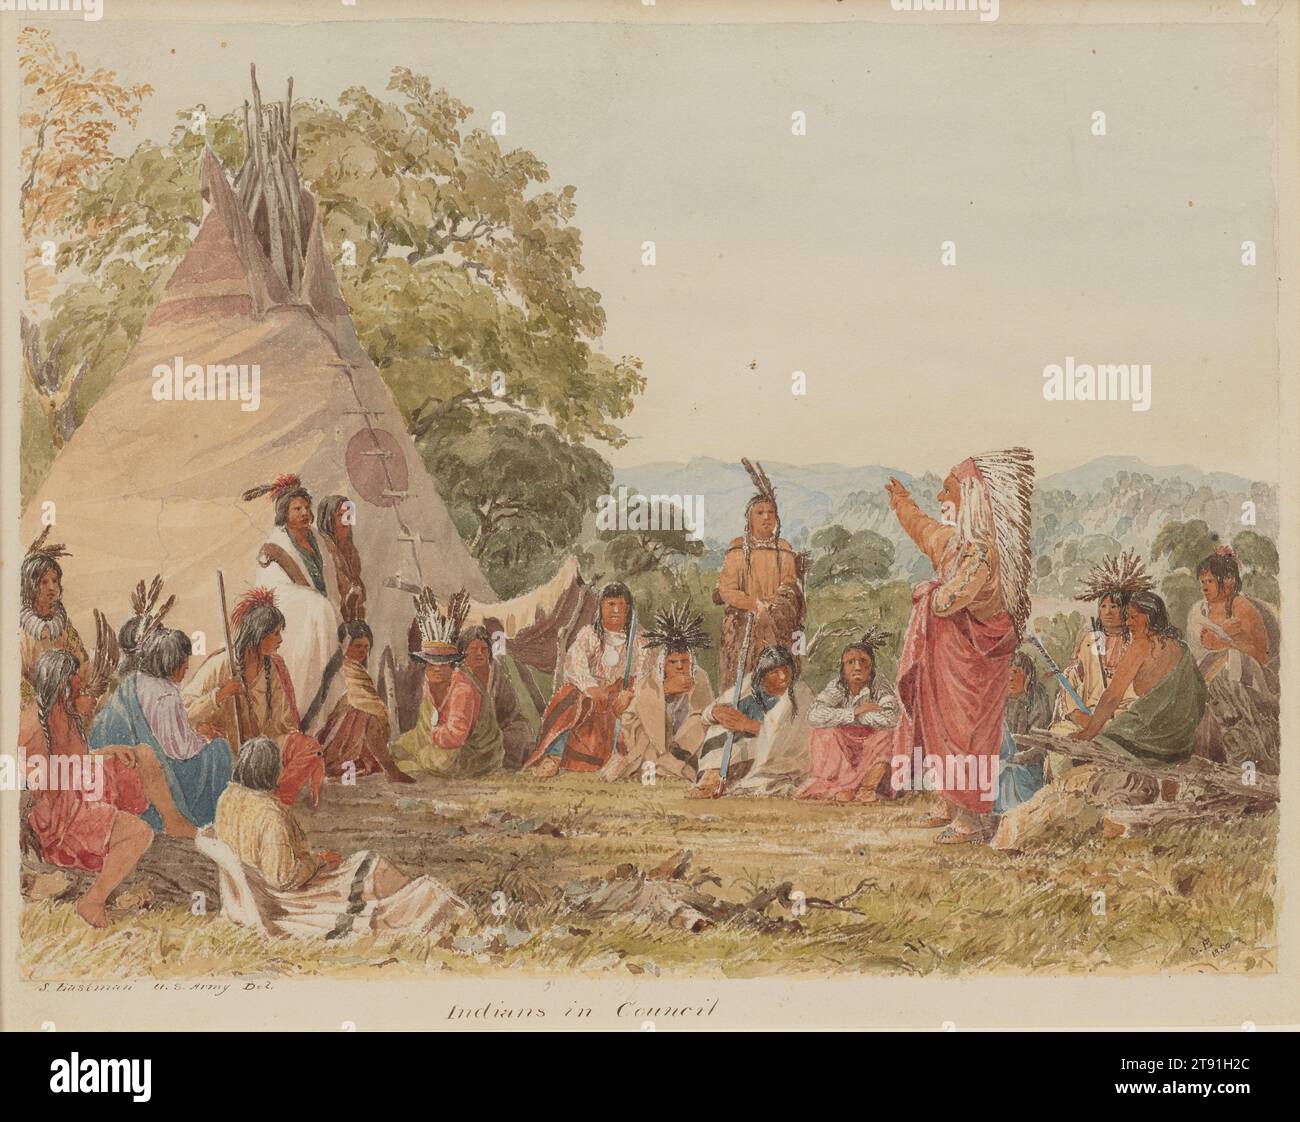 Indians in Council, 1850, Seth Eastman, American, 1808–1875, 8 5/16 × 10 15/16 in. (21.11 × 27.78 cm) (image)9 3/4 × 12 5/8 in. (24.77 × 32 cm) (sheet), Watercolor, United States, 19th century, Seth Eastman may have used this picture-perfect chief and the council theme as an excuse to make candid portraits of these Dakota villagers. Many brought their long-stemmed pipes, signs of hospitality. The blue-and-white striped blanket worn by the figure seated below the person in orange (standing near the chief) could be a Hudson Bay blanket, underscoring the cosmopolitan exchange of goods Stock Photo